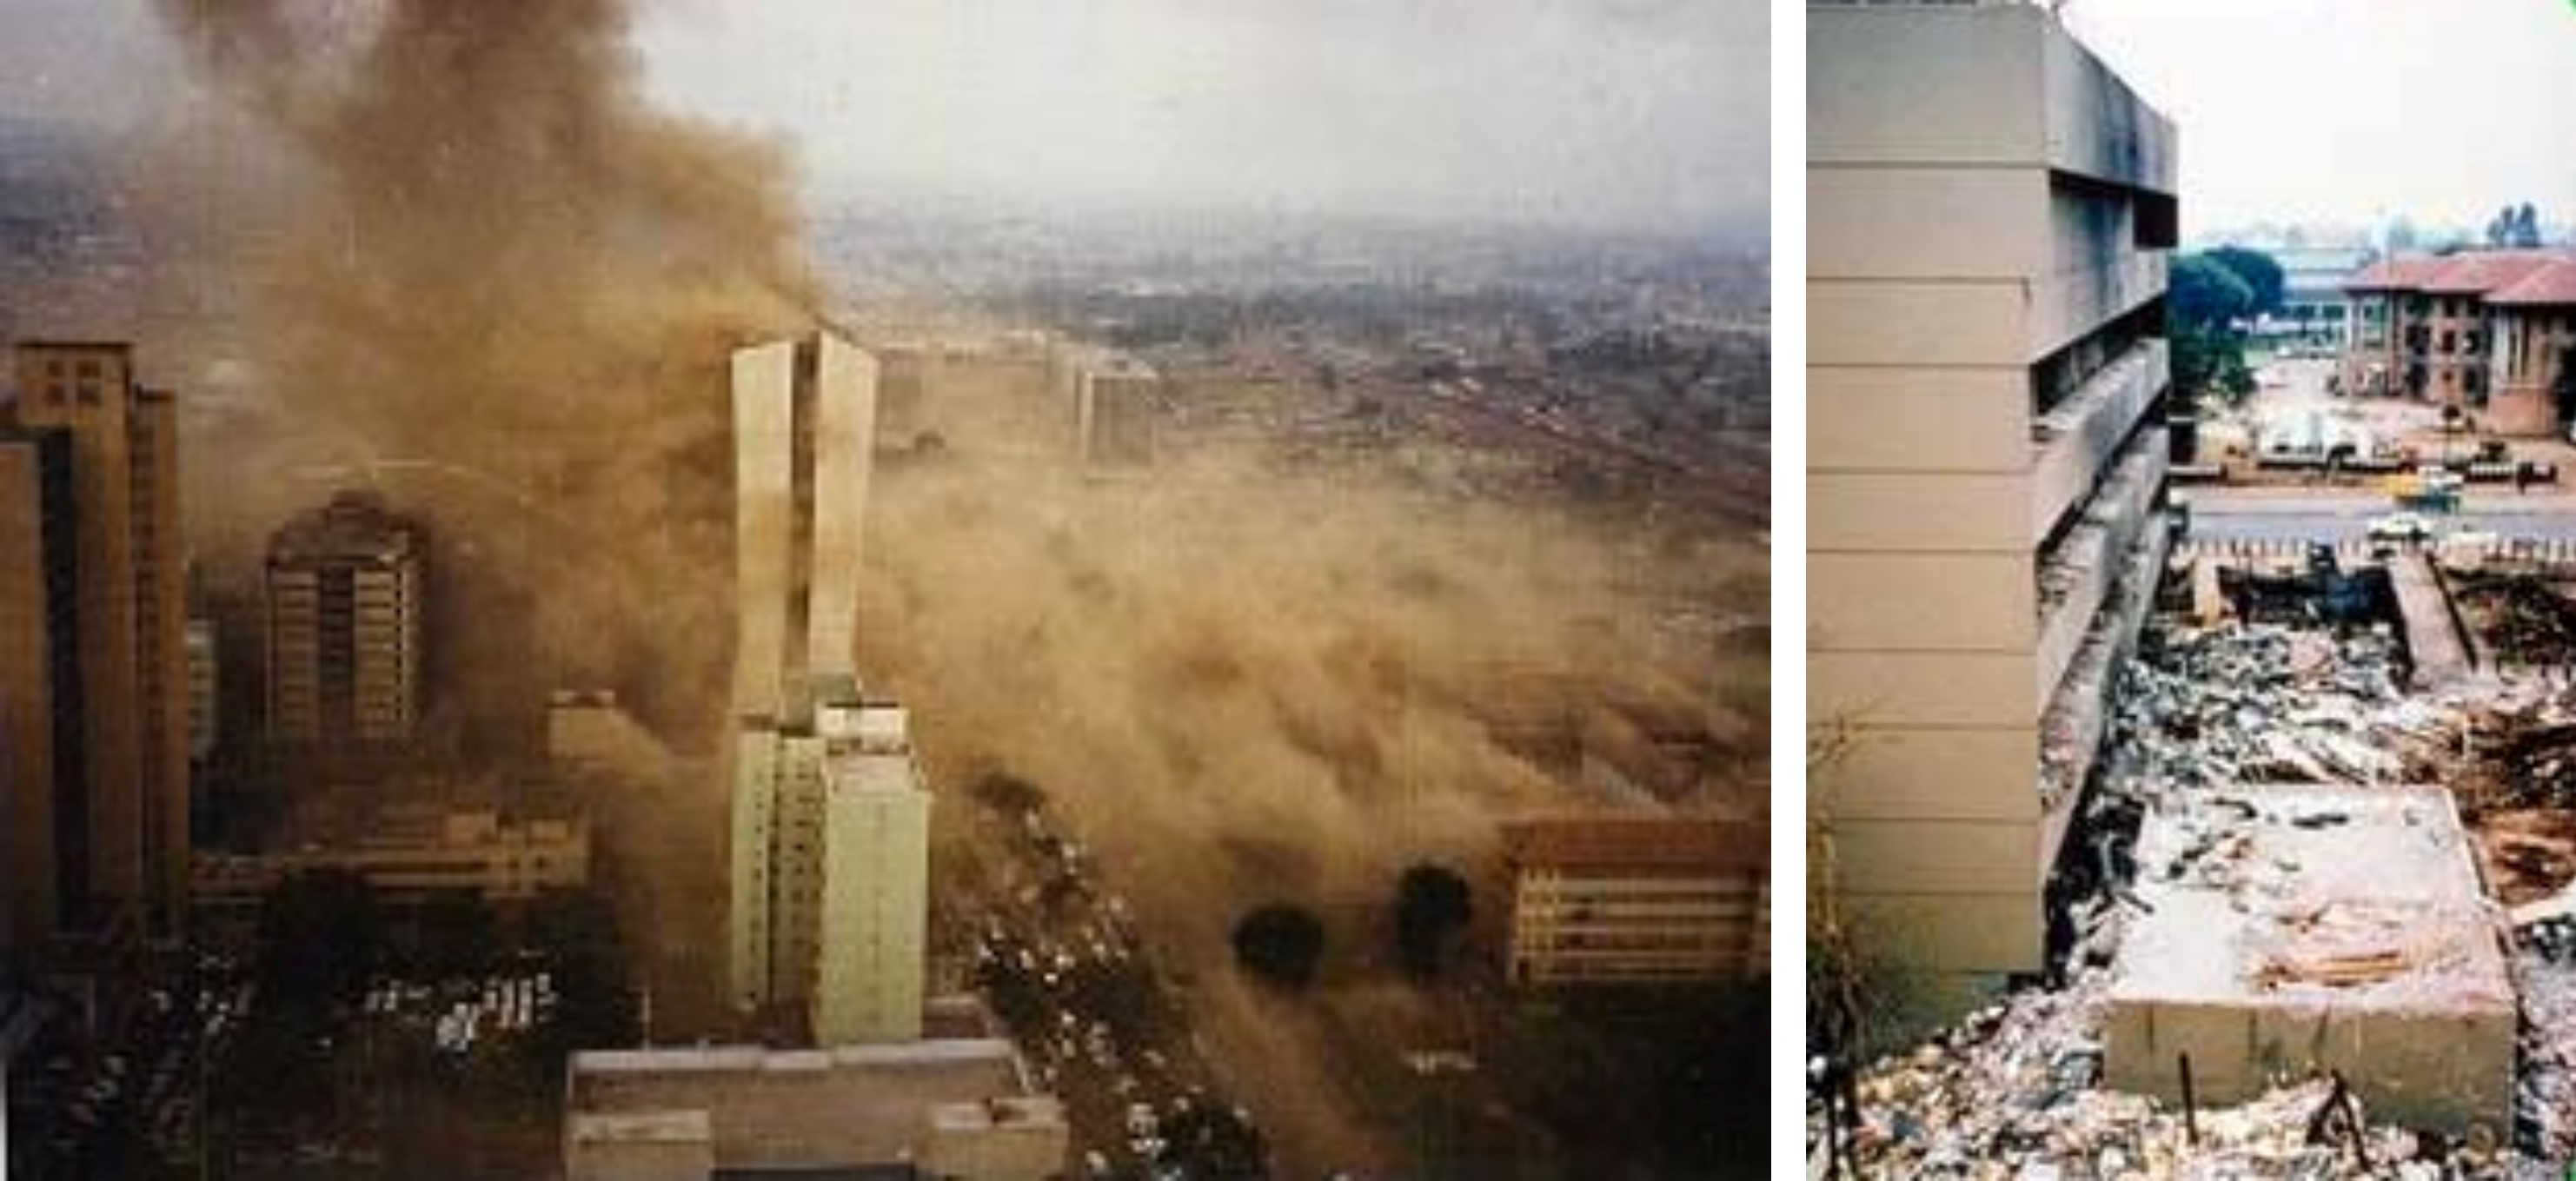 On the left, aerial view of the embassy bomb blast in Nairobi. On the right, the aftermath of the 1998 bombing.